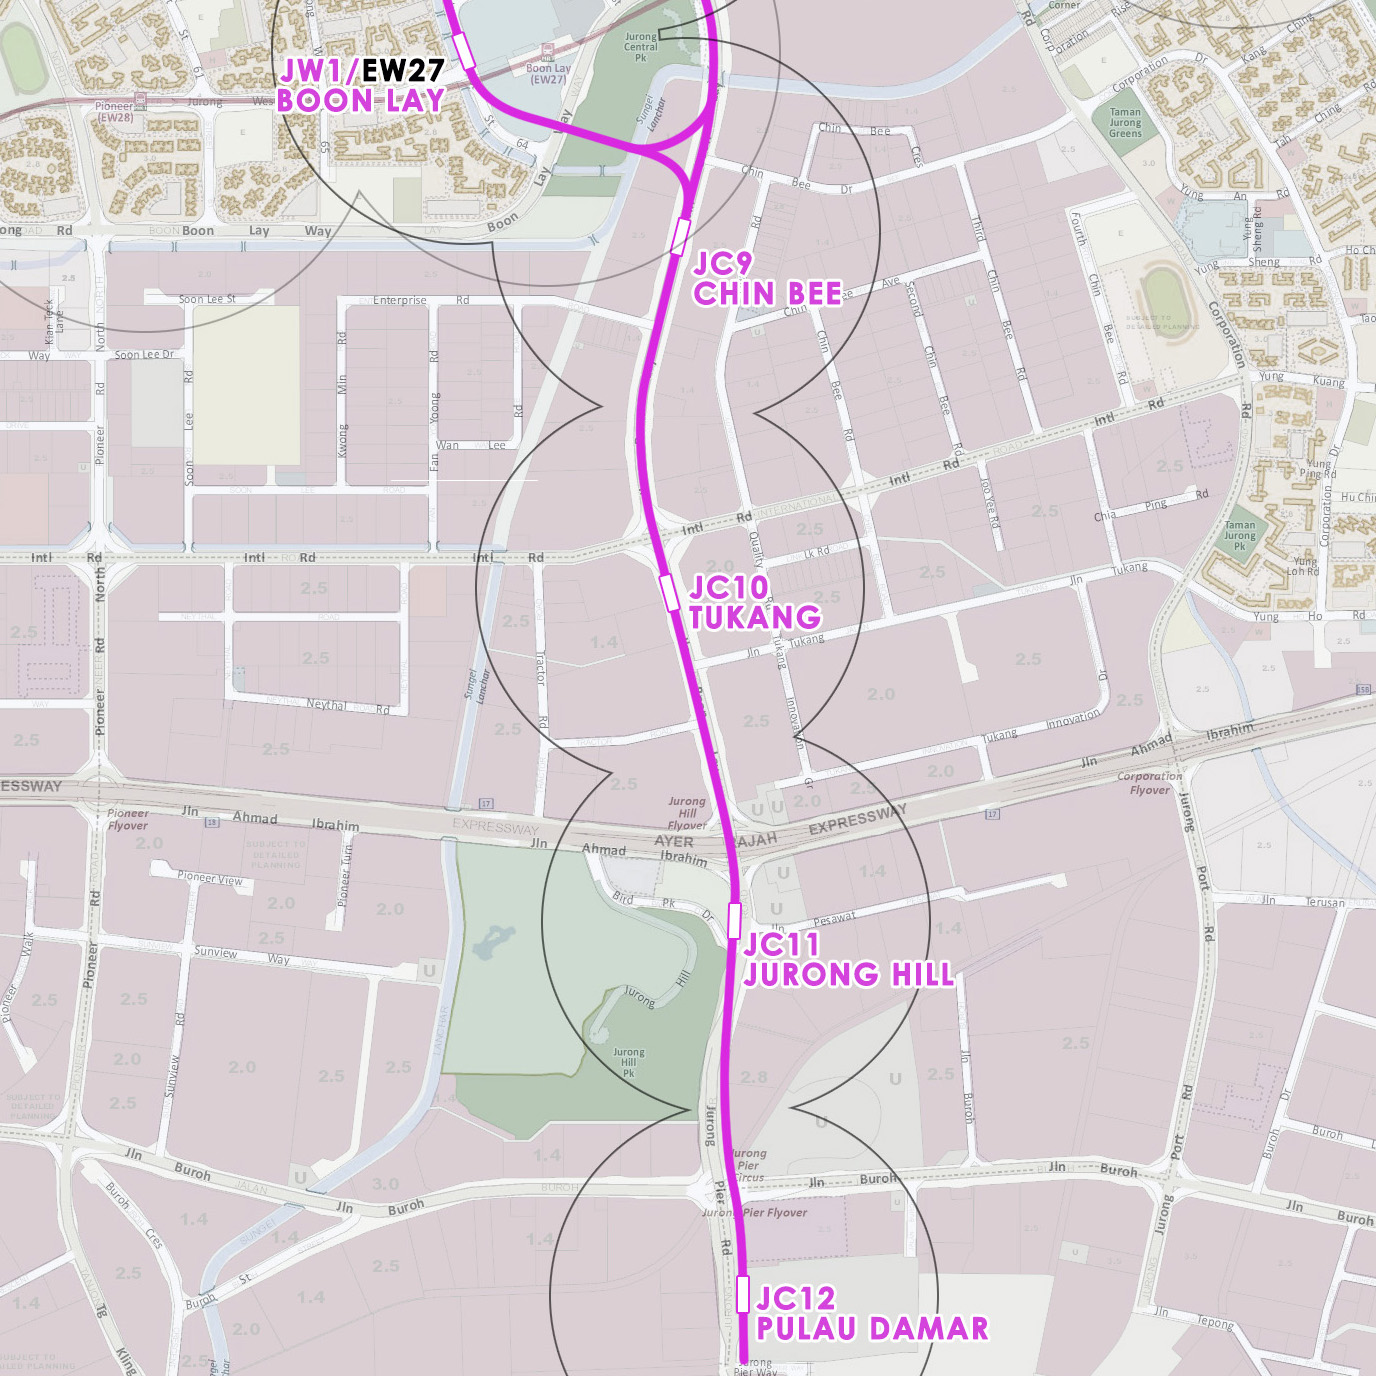 Jurong Region Line Construction: Speculative station locations